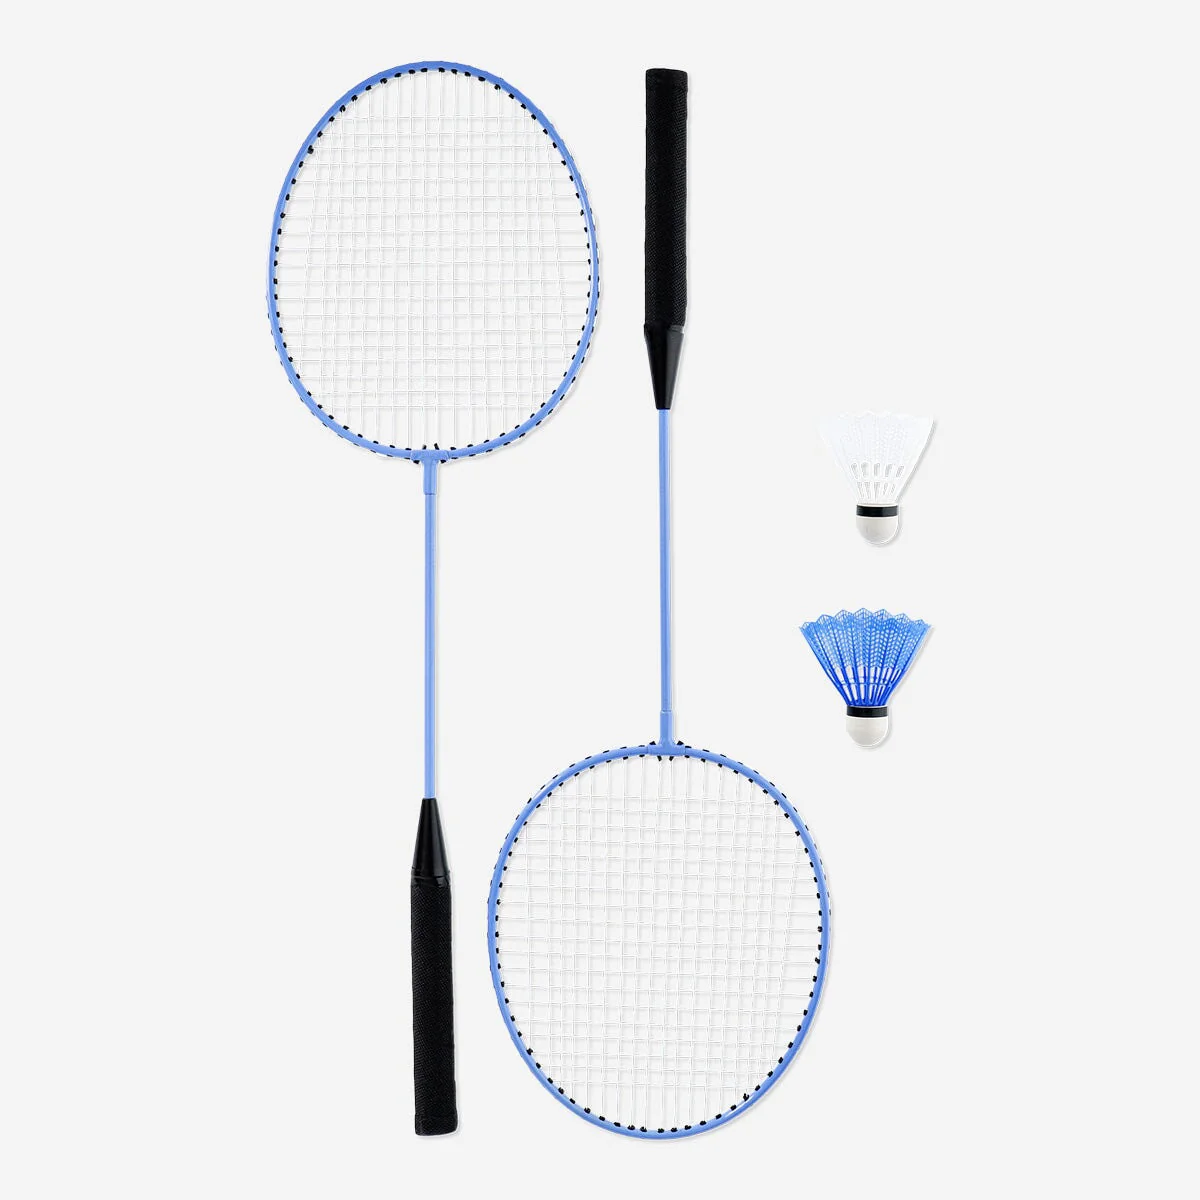 Blue and white badminton rackets with black grips displayed with two types of shuttlecocks on a white background